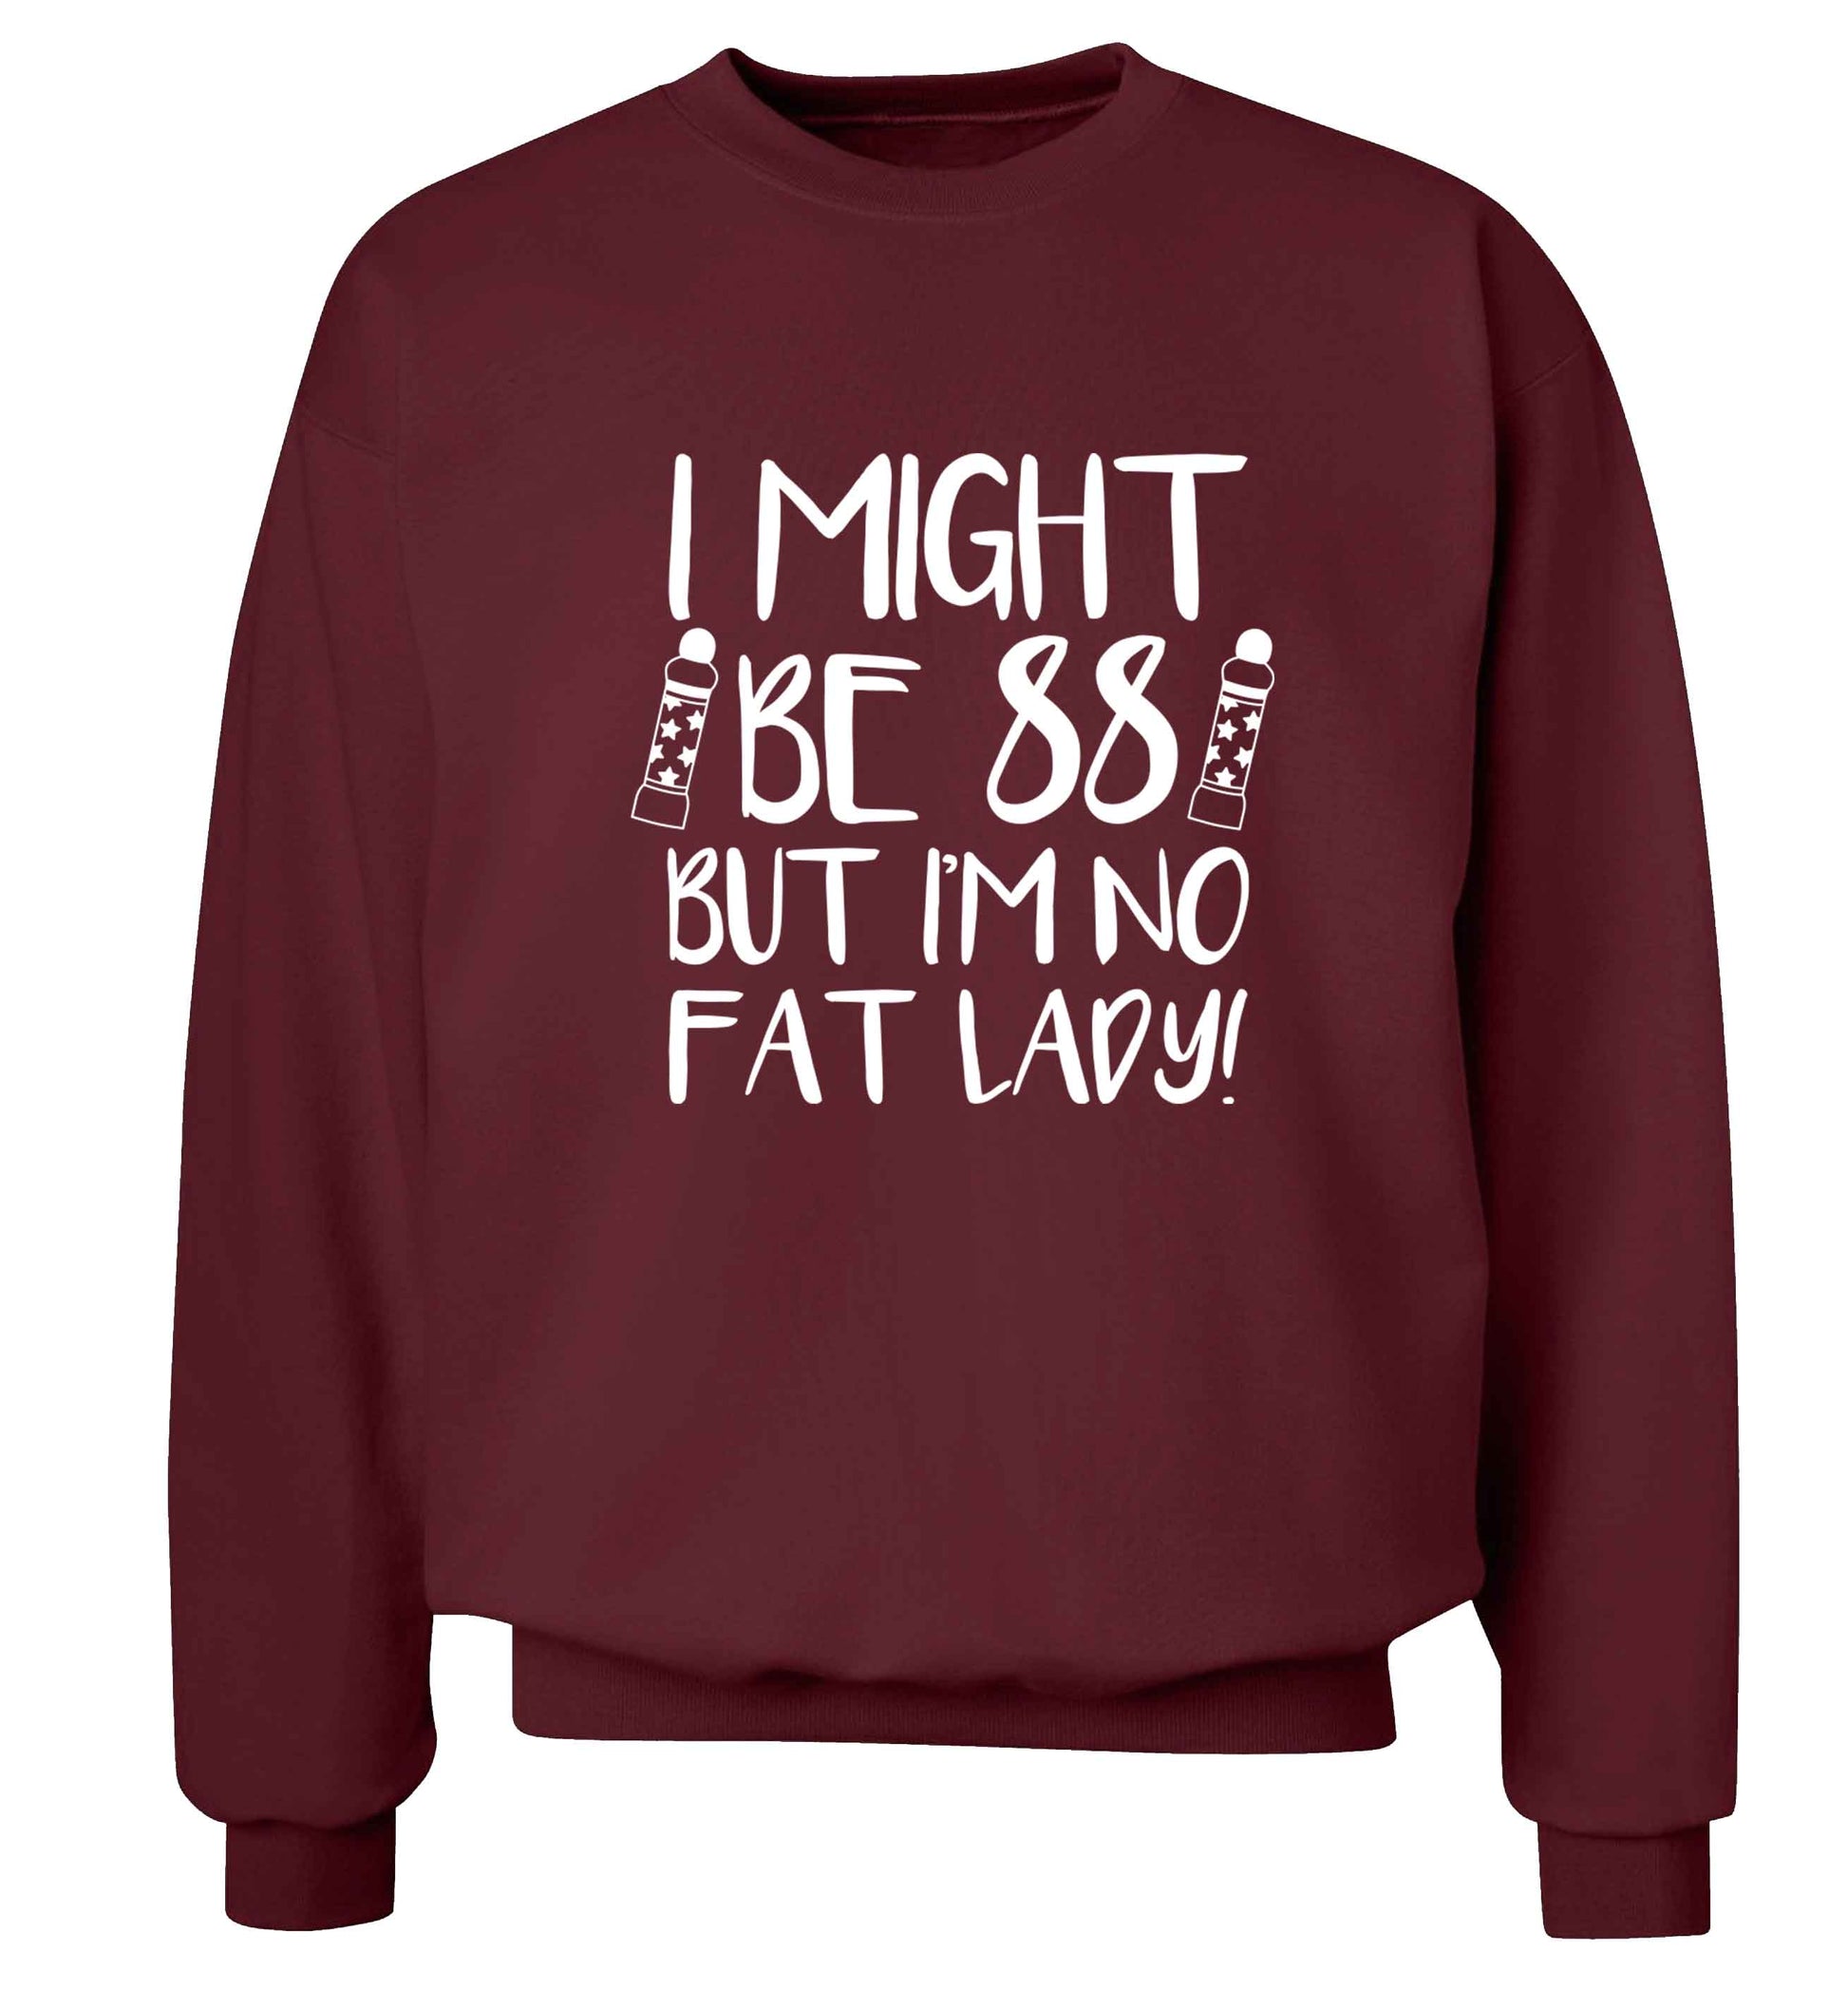 I might be 88 but I'm no fat lady Adult's unisex maroon Sweater 2XL